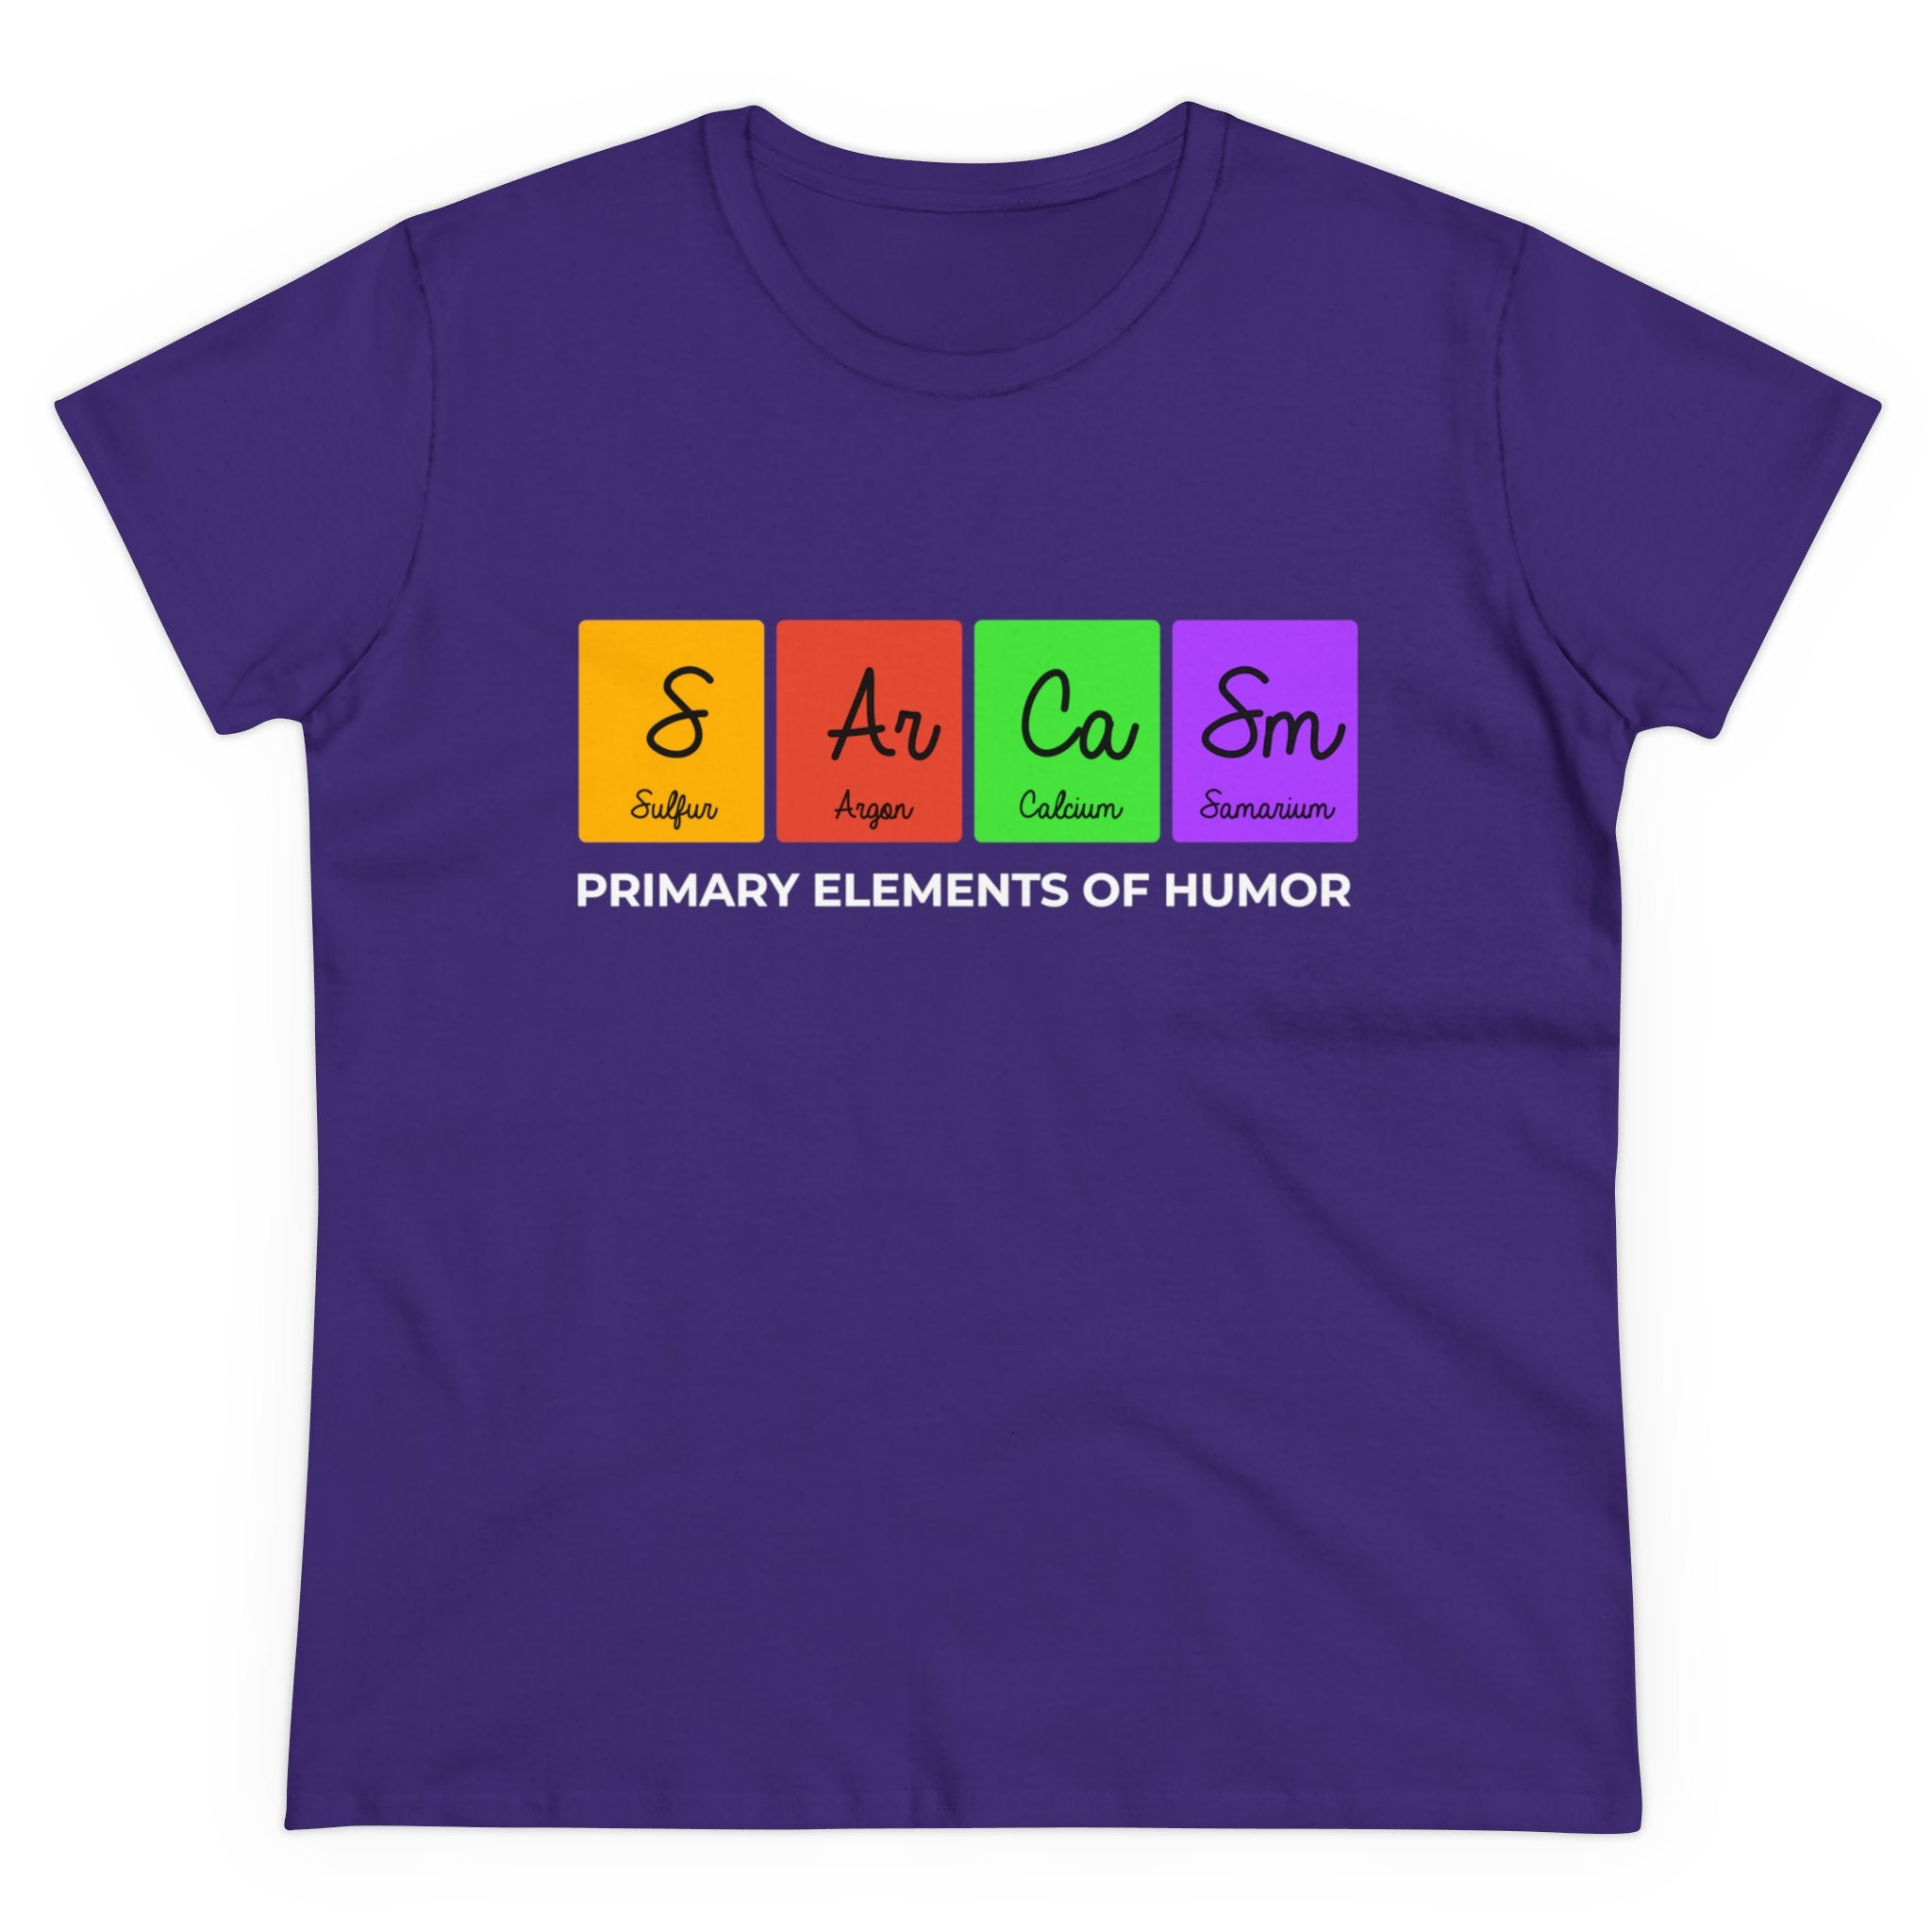 A cozy, purple S-Ar-Ca-Sm - Women's Tee displaying a humorous design featuring chemical symbols for Sulfur, Argon, Calcium, and Samarium, spelling out "Sarcasm." Text below reads "Primary Elements of Humor." Made from soft cotton for ultimate comfort.